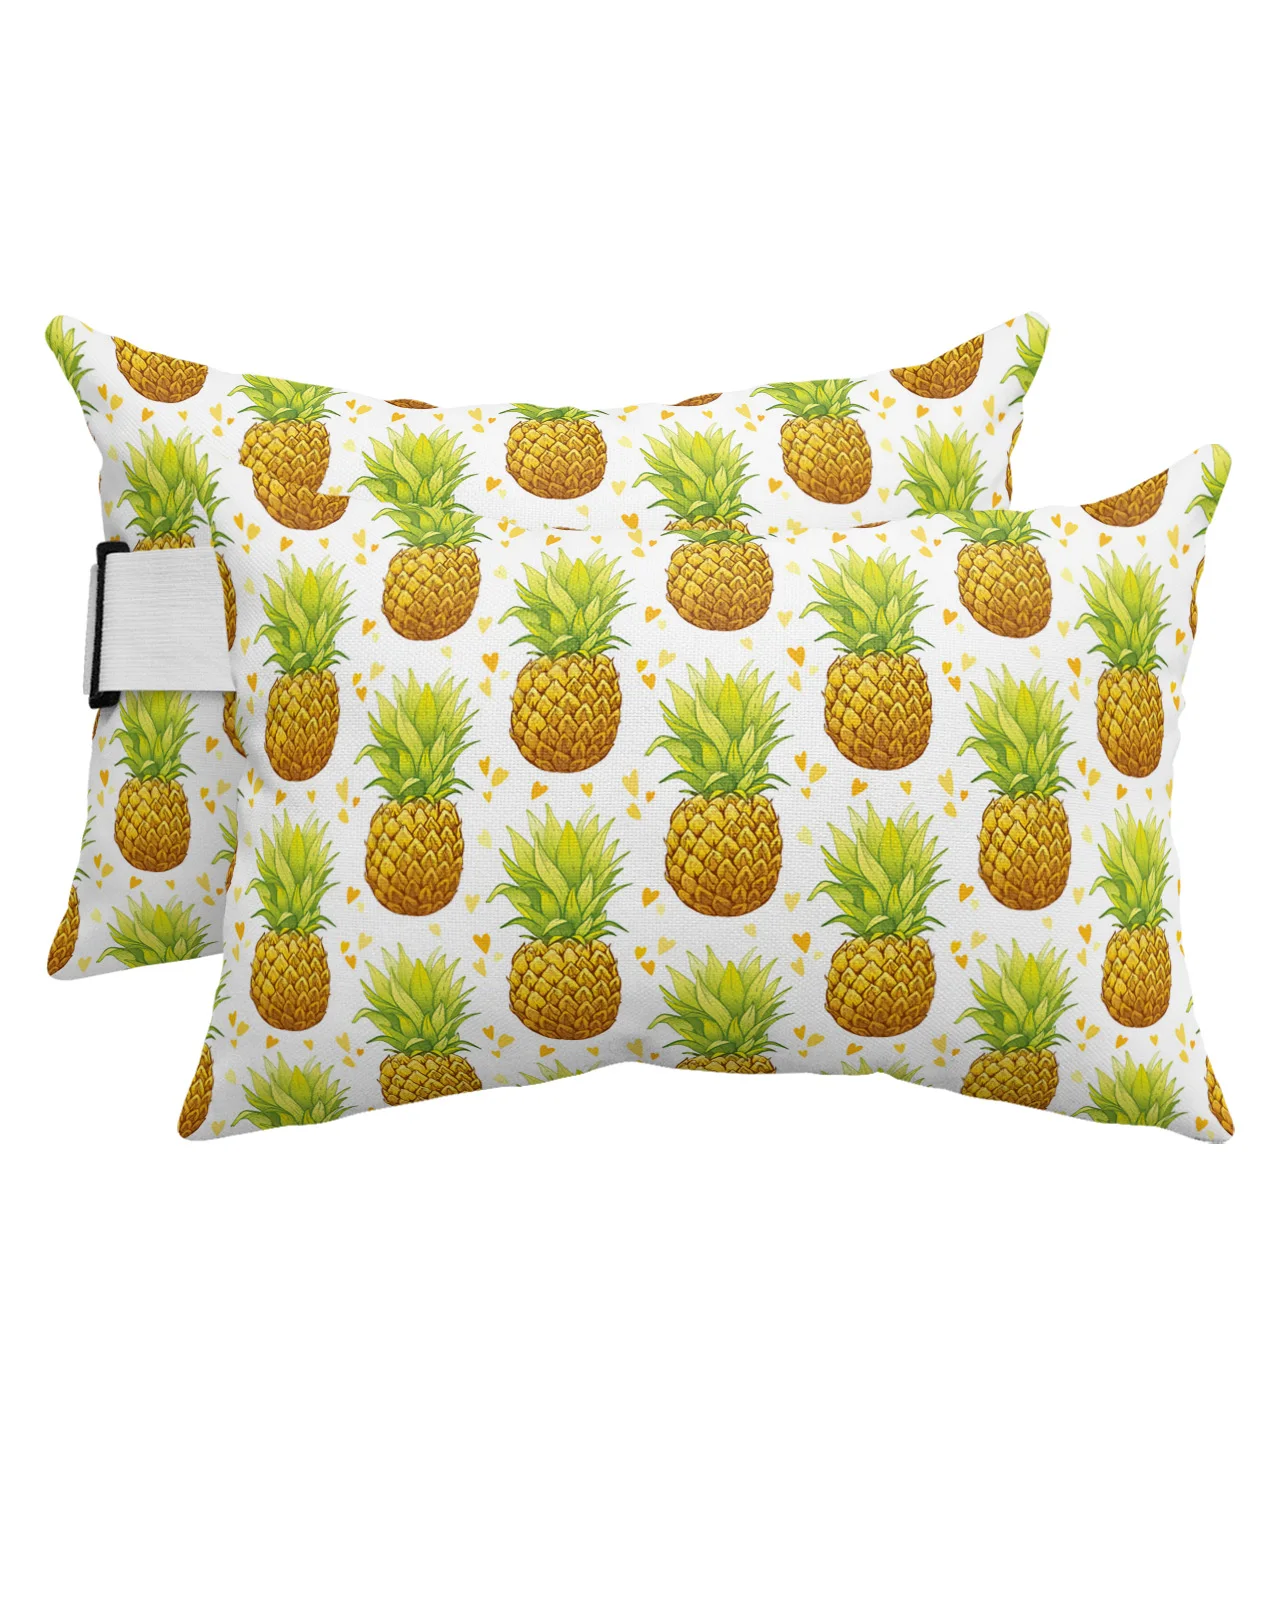 

Pineapple Watercolor Hand Painted Waterproof Pillow With Insert Adjustable Lounge Chair Recliner Head Lumbar Travel Pillow